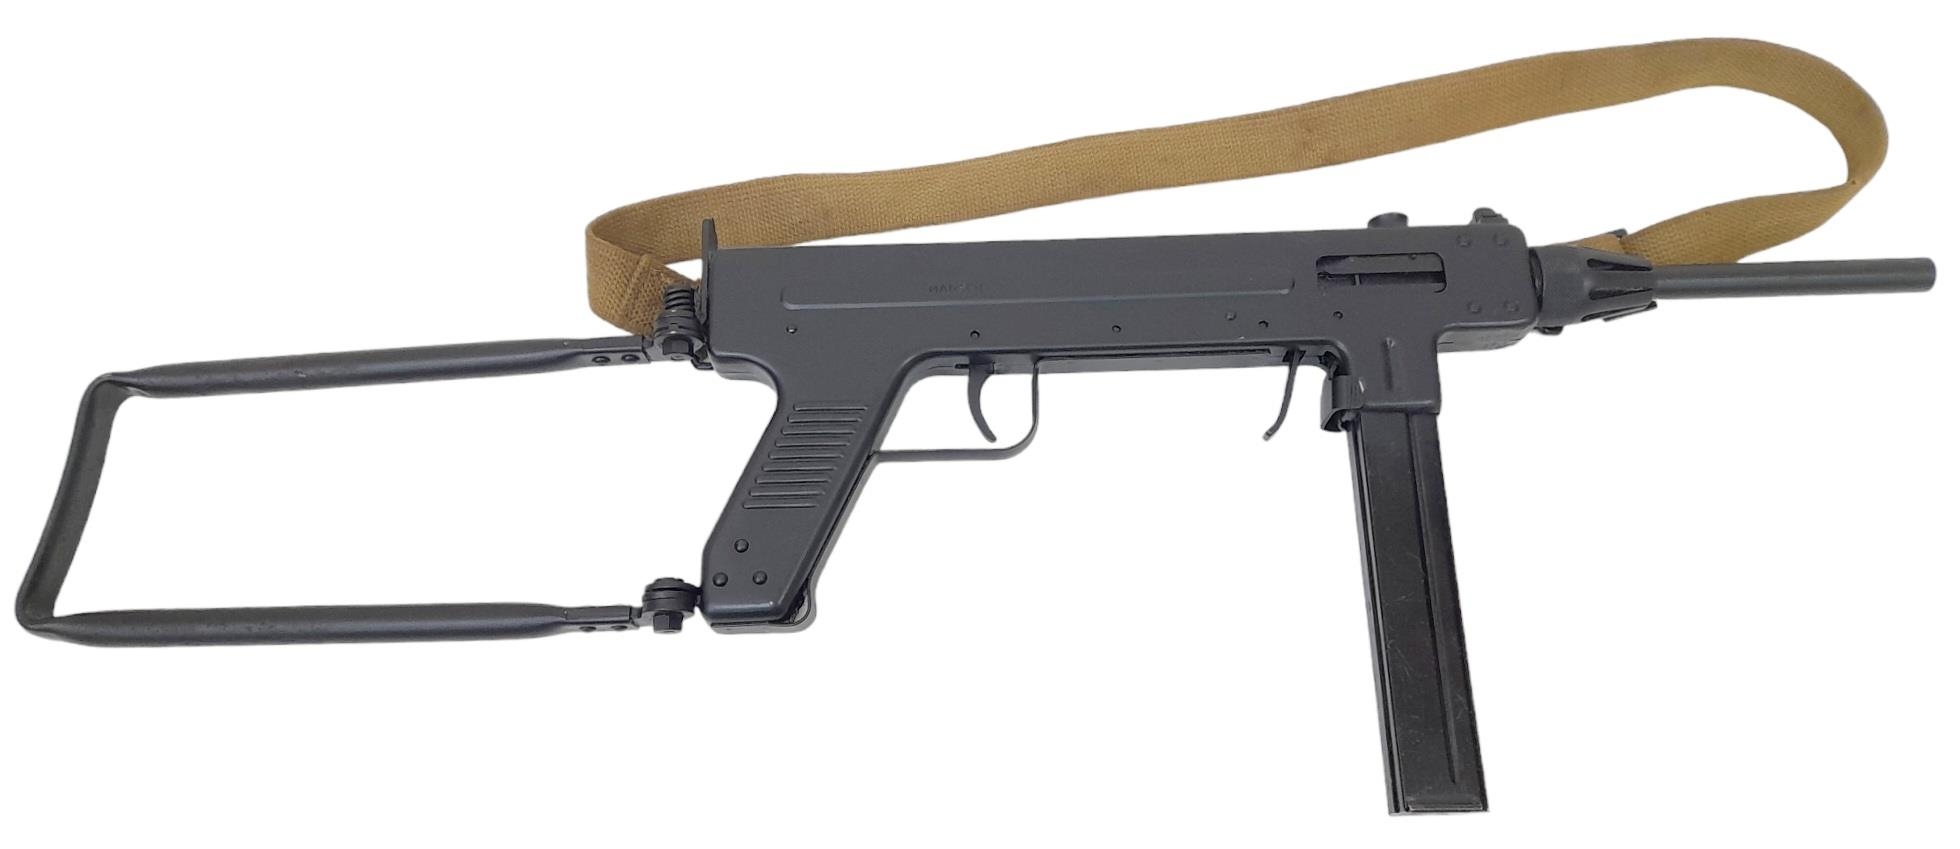 A Deactivated Danish Madsen M46 9mm Sub Machine Gun. Introduced in 1946 and replaced in 1950 with